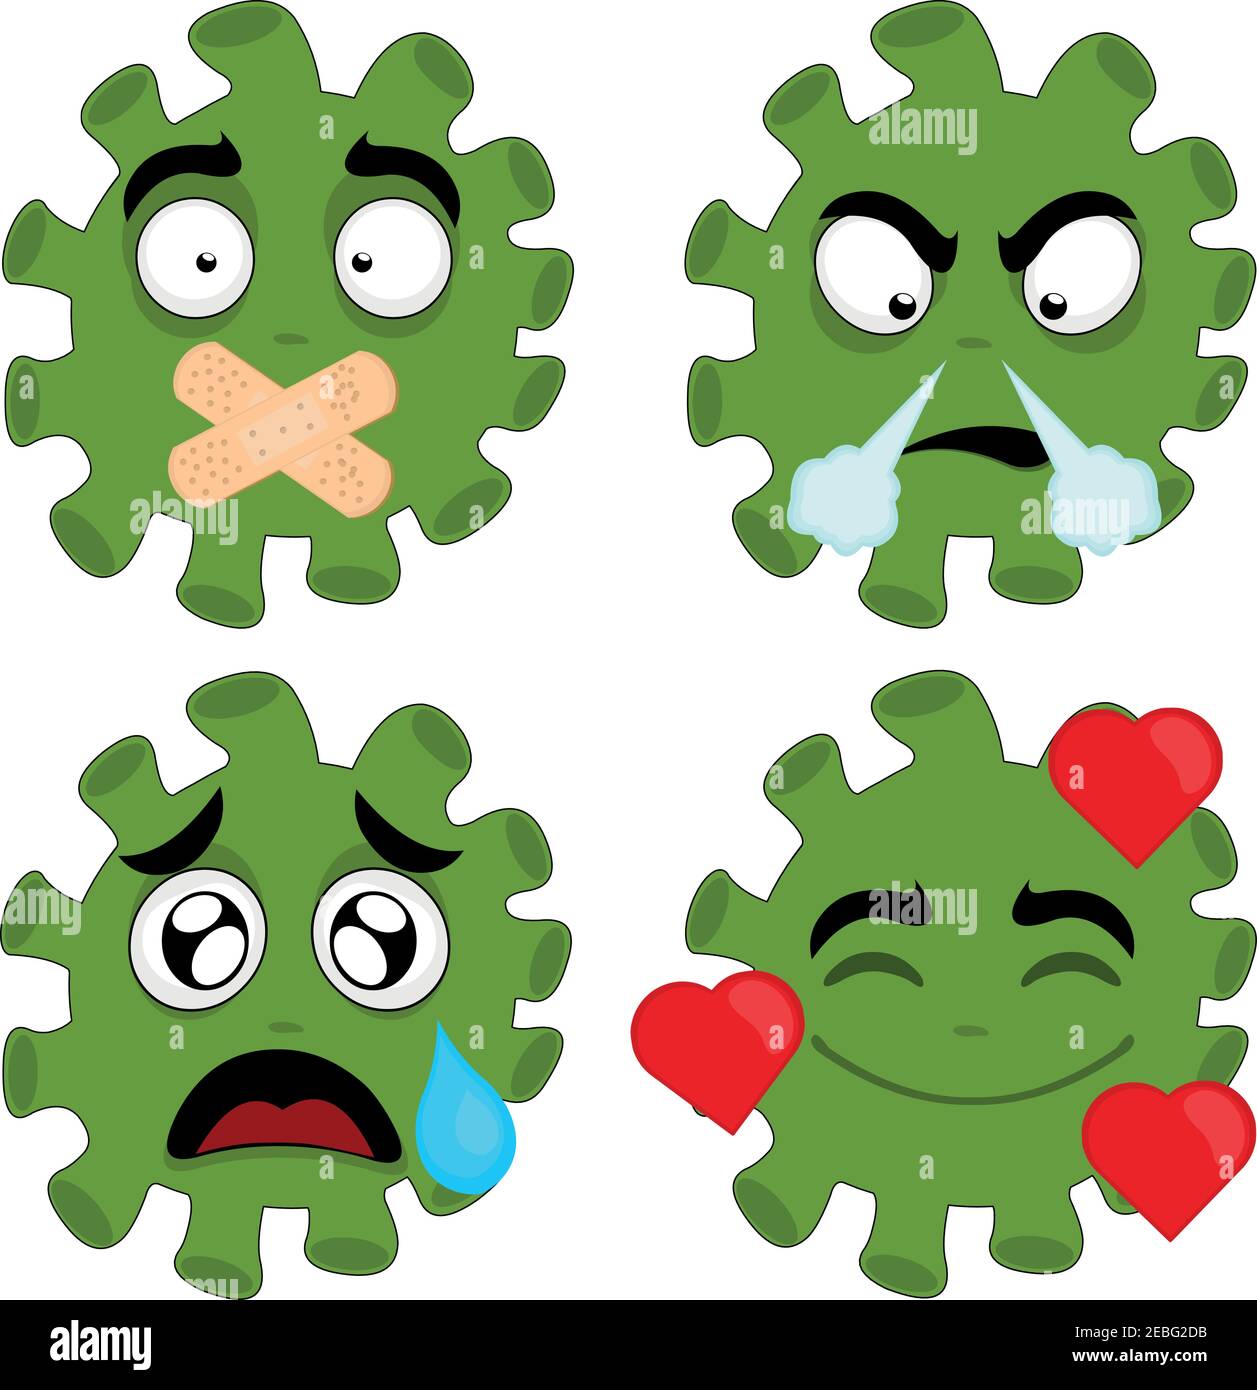 Vector illustration of cartoon coronavirus emoticons with expressions of anger, fear, sadness, love and with a closed mouth with adhesive bands Stock Vector